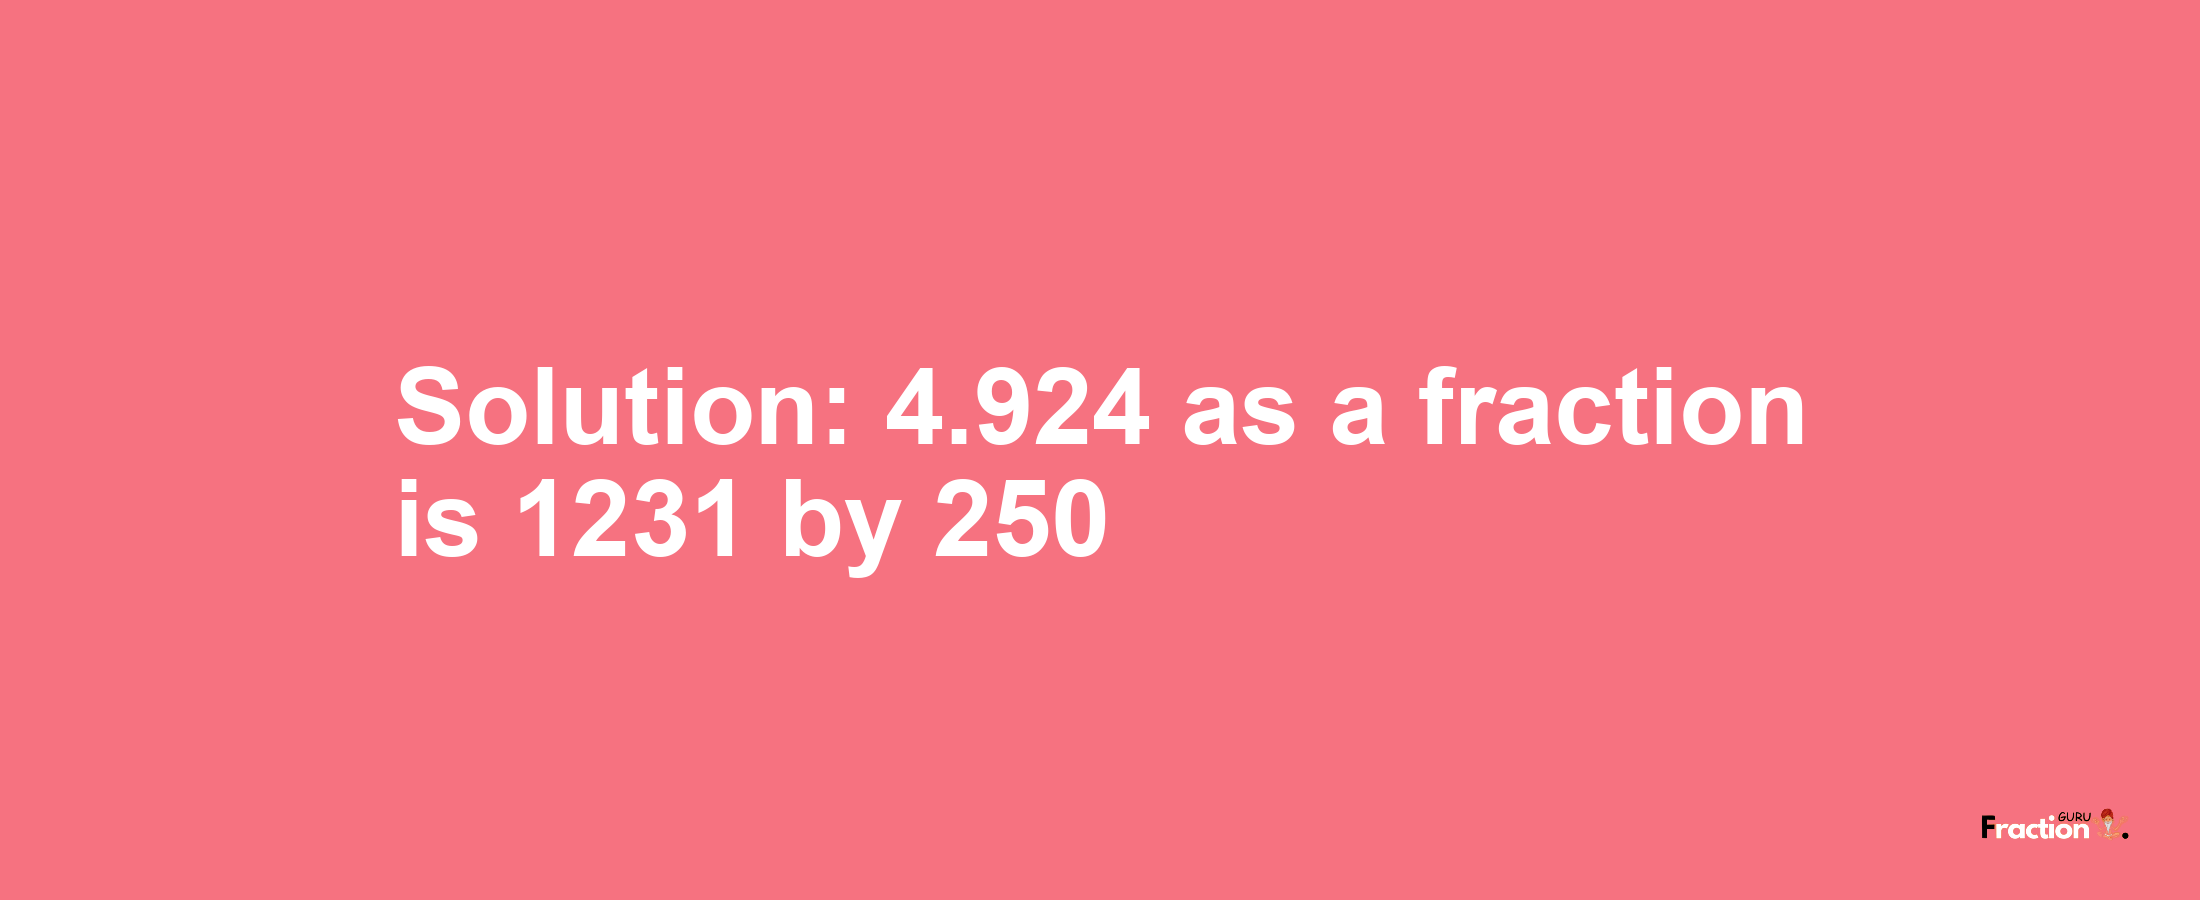 Solution:4.924 as a fraction is 1231/250